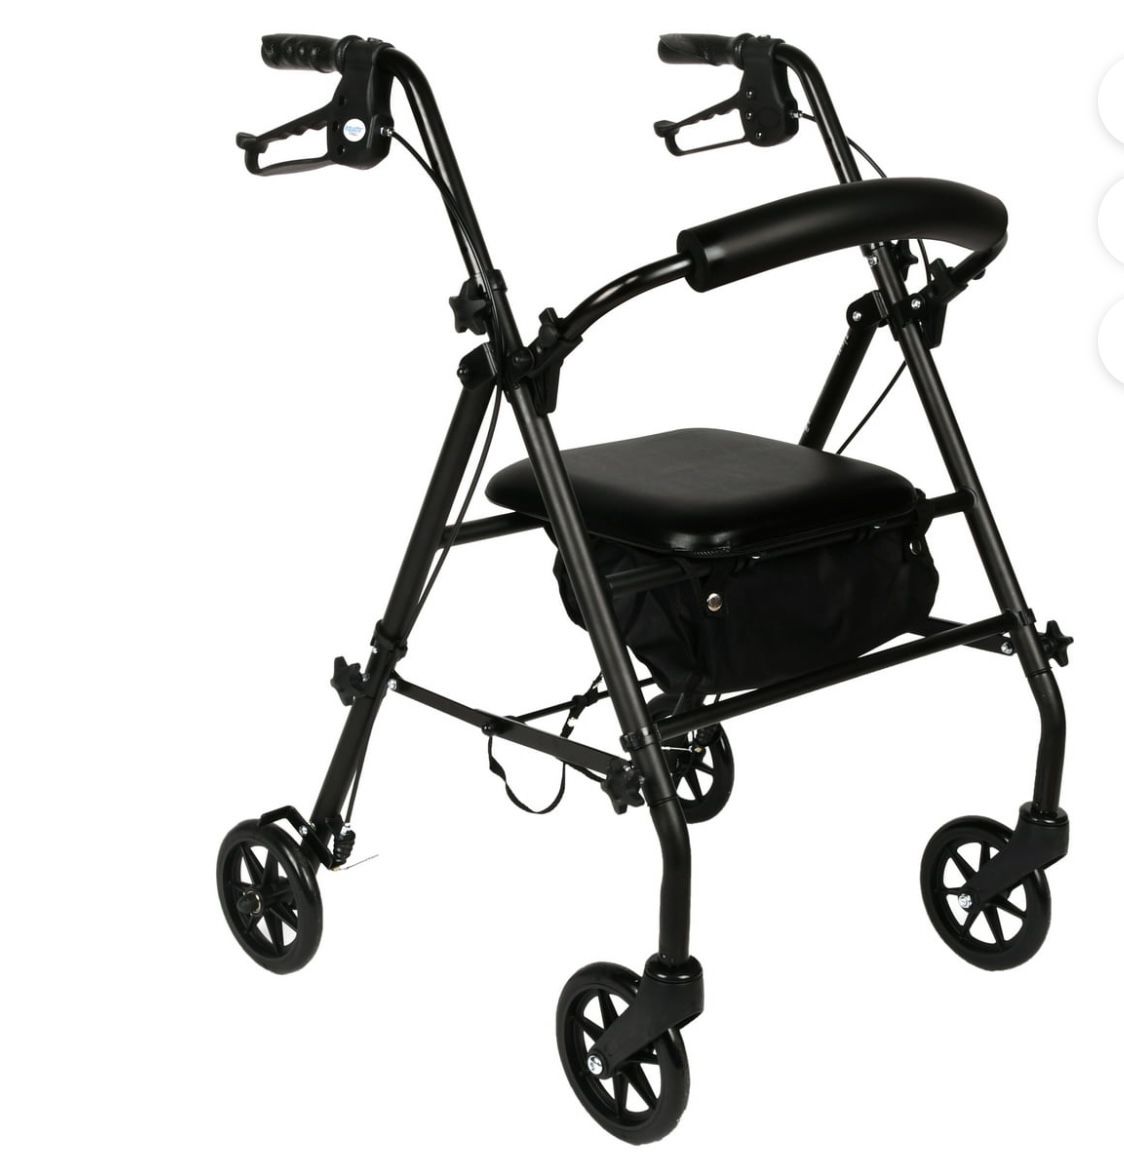 Equate Equate Rolling Walker for Seniors, Rollator with Seat and Wheels, Black, 350 lb Capacity